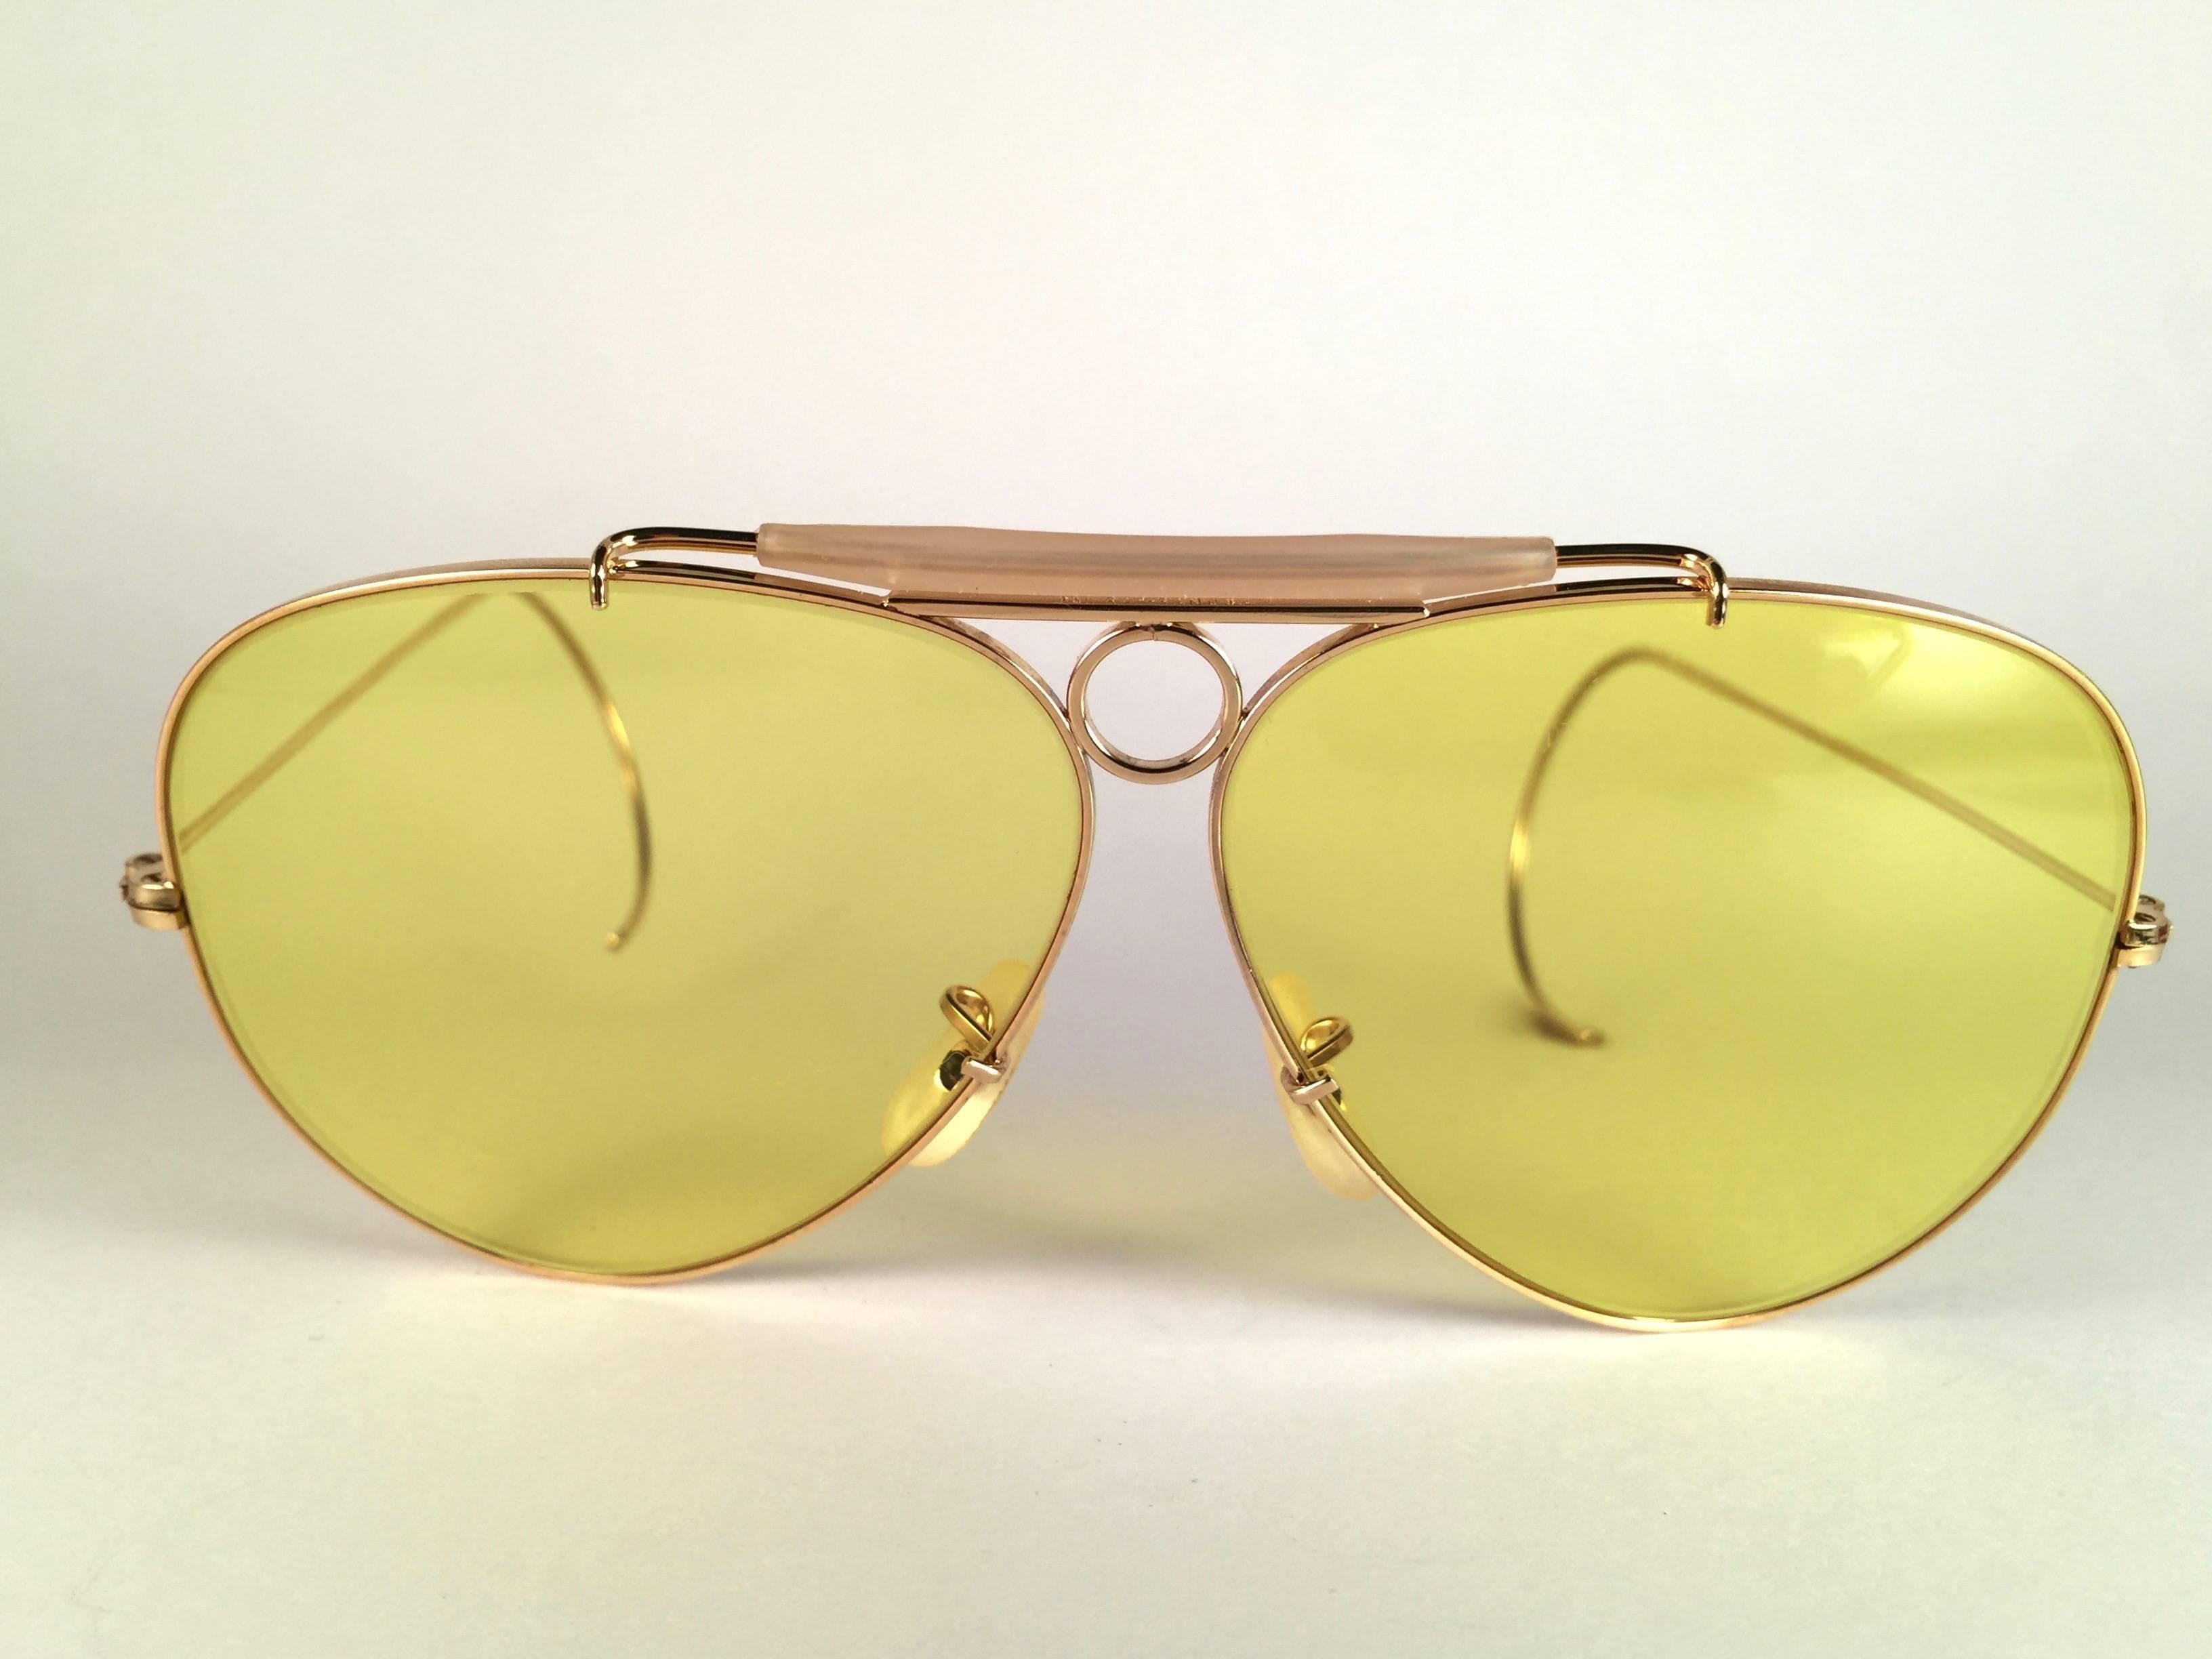 New Vintage Ray Ban Shooter Kalichrome 62mm with iridescent white nose pieces marked B&L. 
B&L etched in the lenses. 
Comes with its original Ray Ban B&L case. 
A seldom piece in new, never worn or displayed condition.